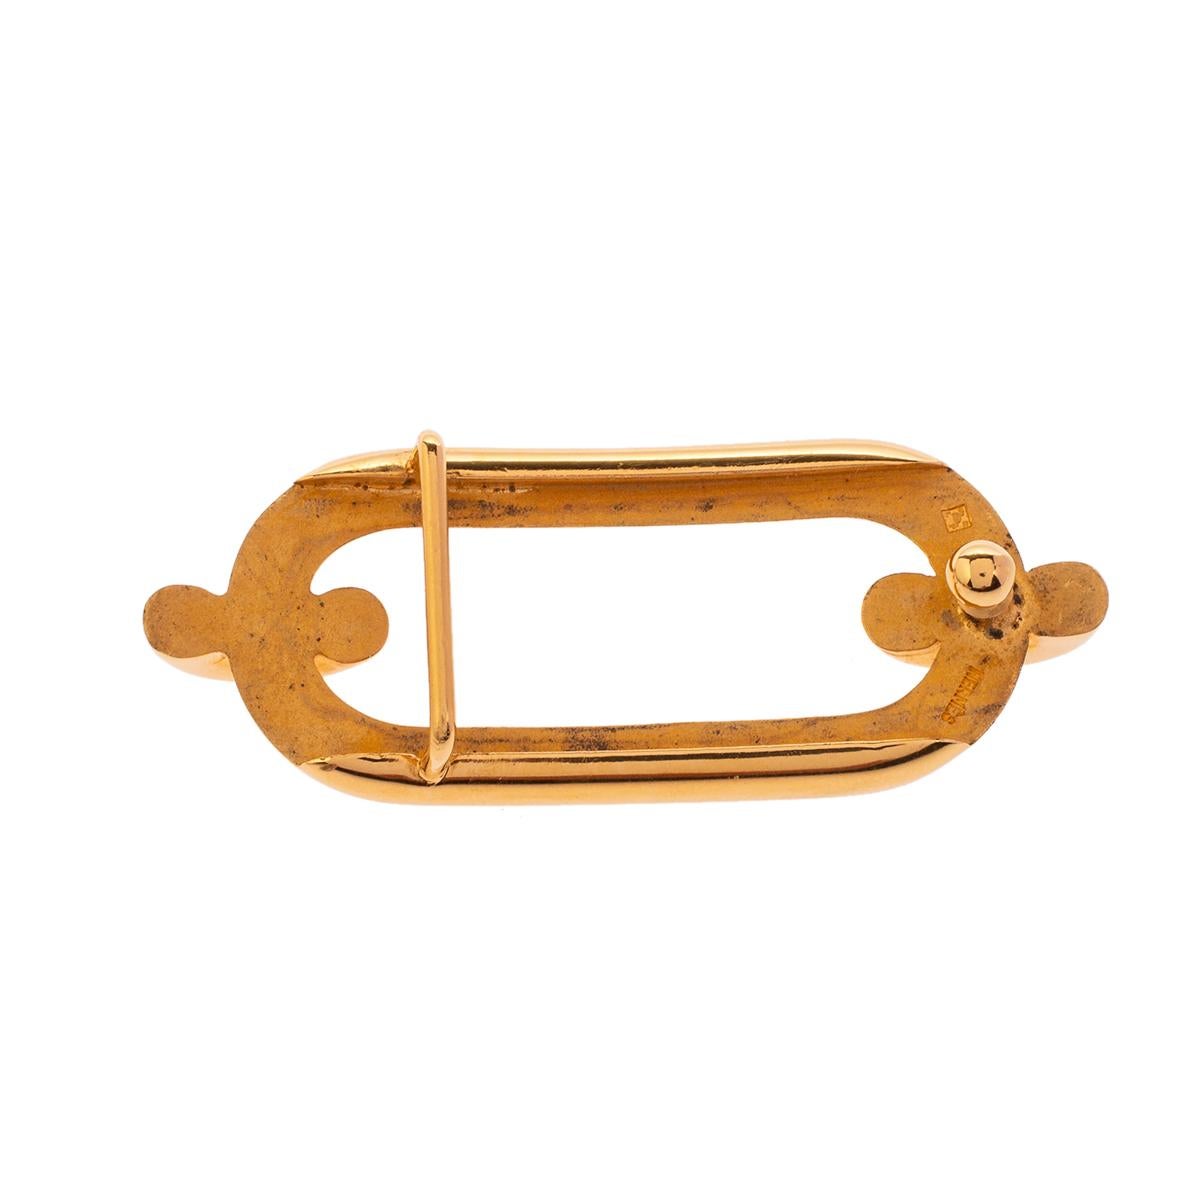 Easy to match with a variety of belt straps, this Hermès Vintage buckle is a versatile creation. It is sculpted from gold-plated metal as the brand's signature Chaine d’Ancre design. The buckle exudes the right look of luxury in a minimal